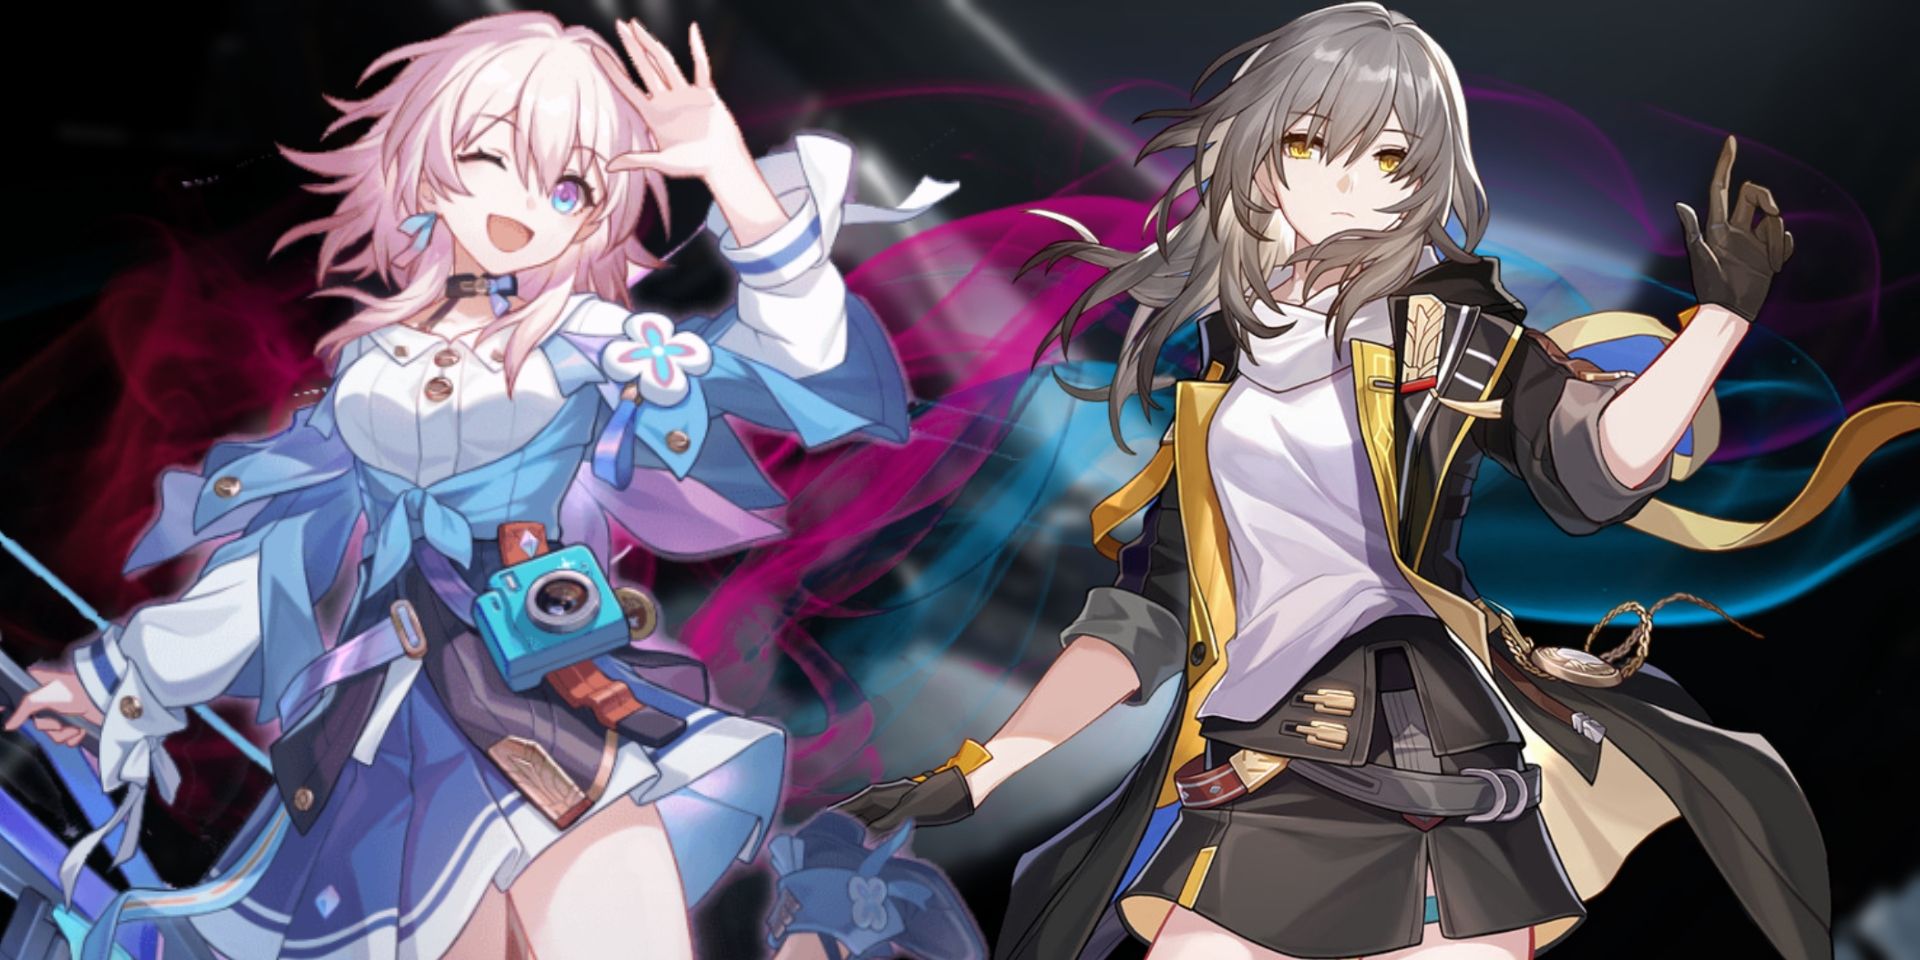 Honkai Star Rail's March 7th character to the left and Trailblazer to the right. Behind them is a pink and blue smoke effect.